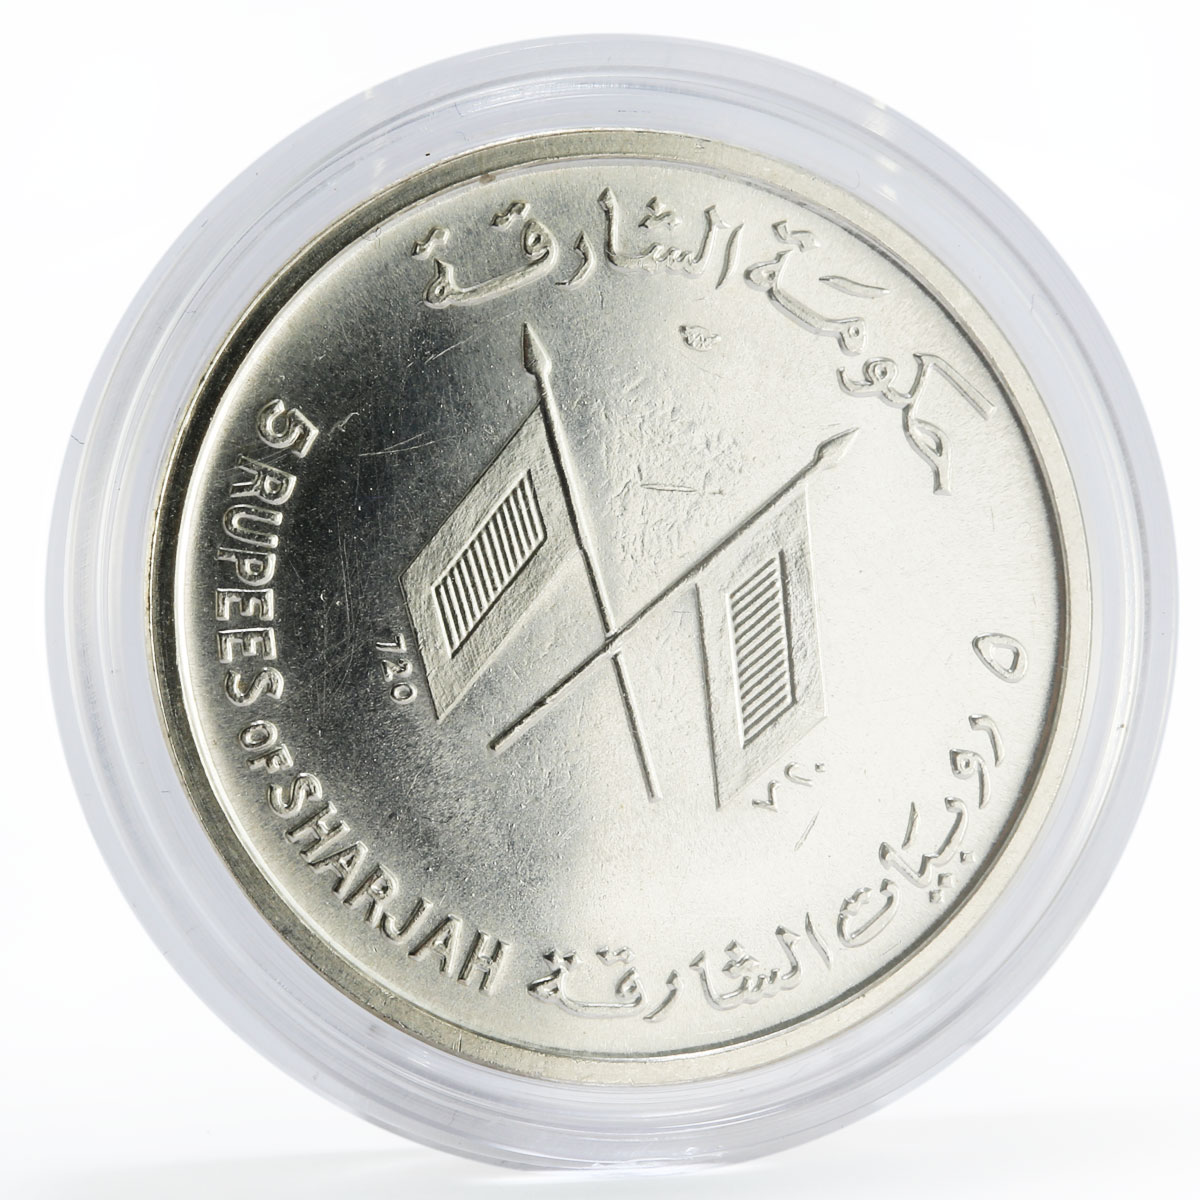 Sharjah 5 rupees Commemoration of John Kennedy silver coin 1964